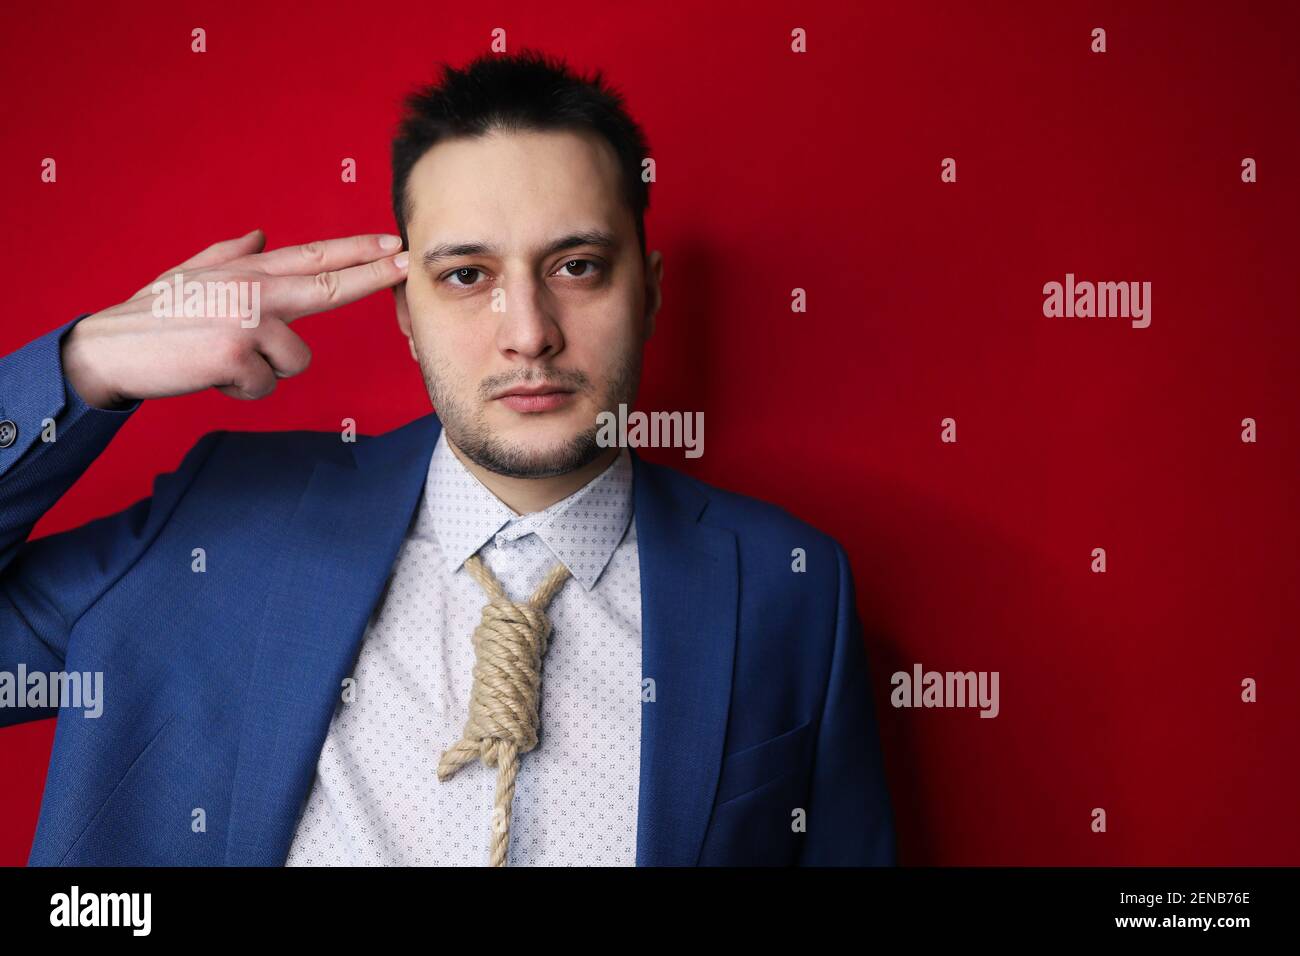 Concept image of business in trouble. Man in suit with Lynch loop instead of tie over neck. suicidal symbol of finger shot to head. Stock Photo